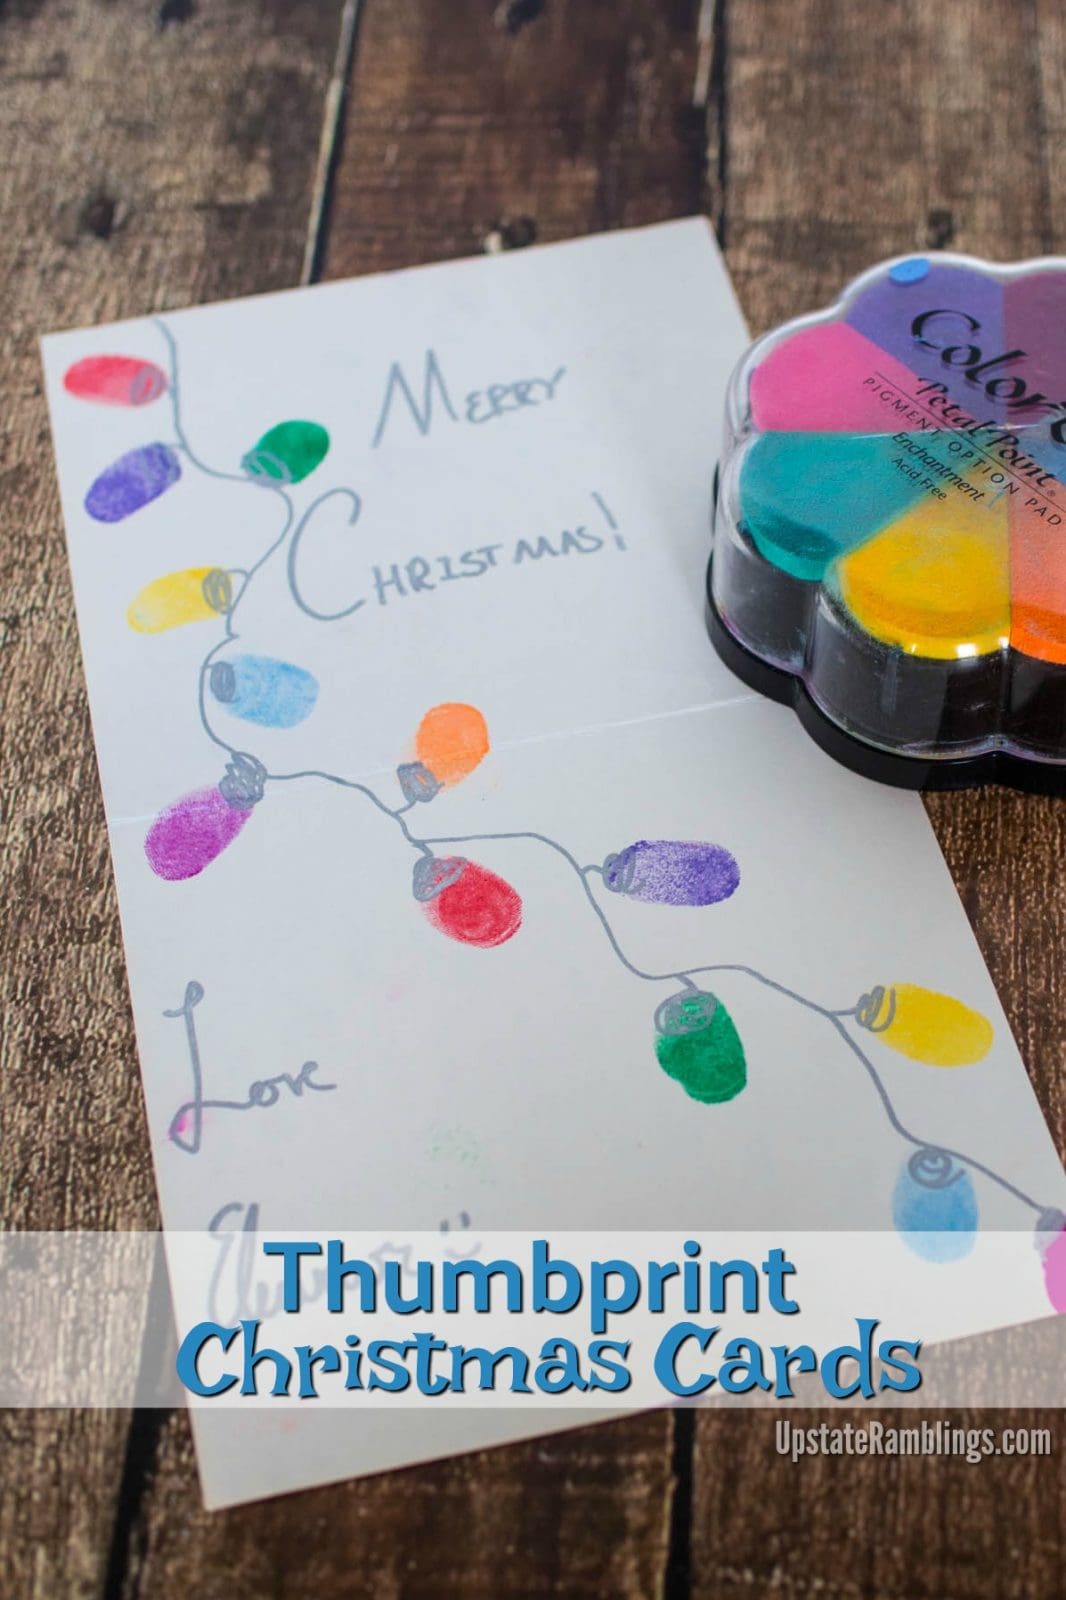 I love these cute Thumbprint Christmas cards! They are so easy to make and a great way to get kids involved in making and sending cards & presents. Make these cute & easy Thumbprint Christmas Cards - DIY Holiday cards your kids can make - includes directions for thumbprint Santa, thumbprint Christmas lights and thumbprint reindeer. #DIYcrafts #thumbprintcards #christmascards #holidaycards